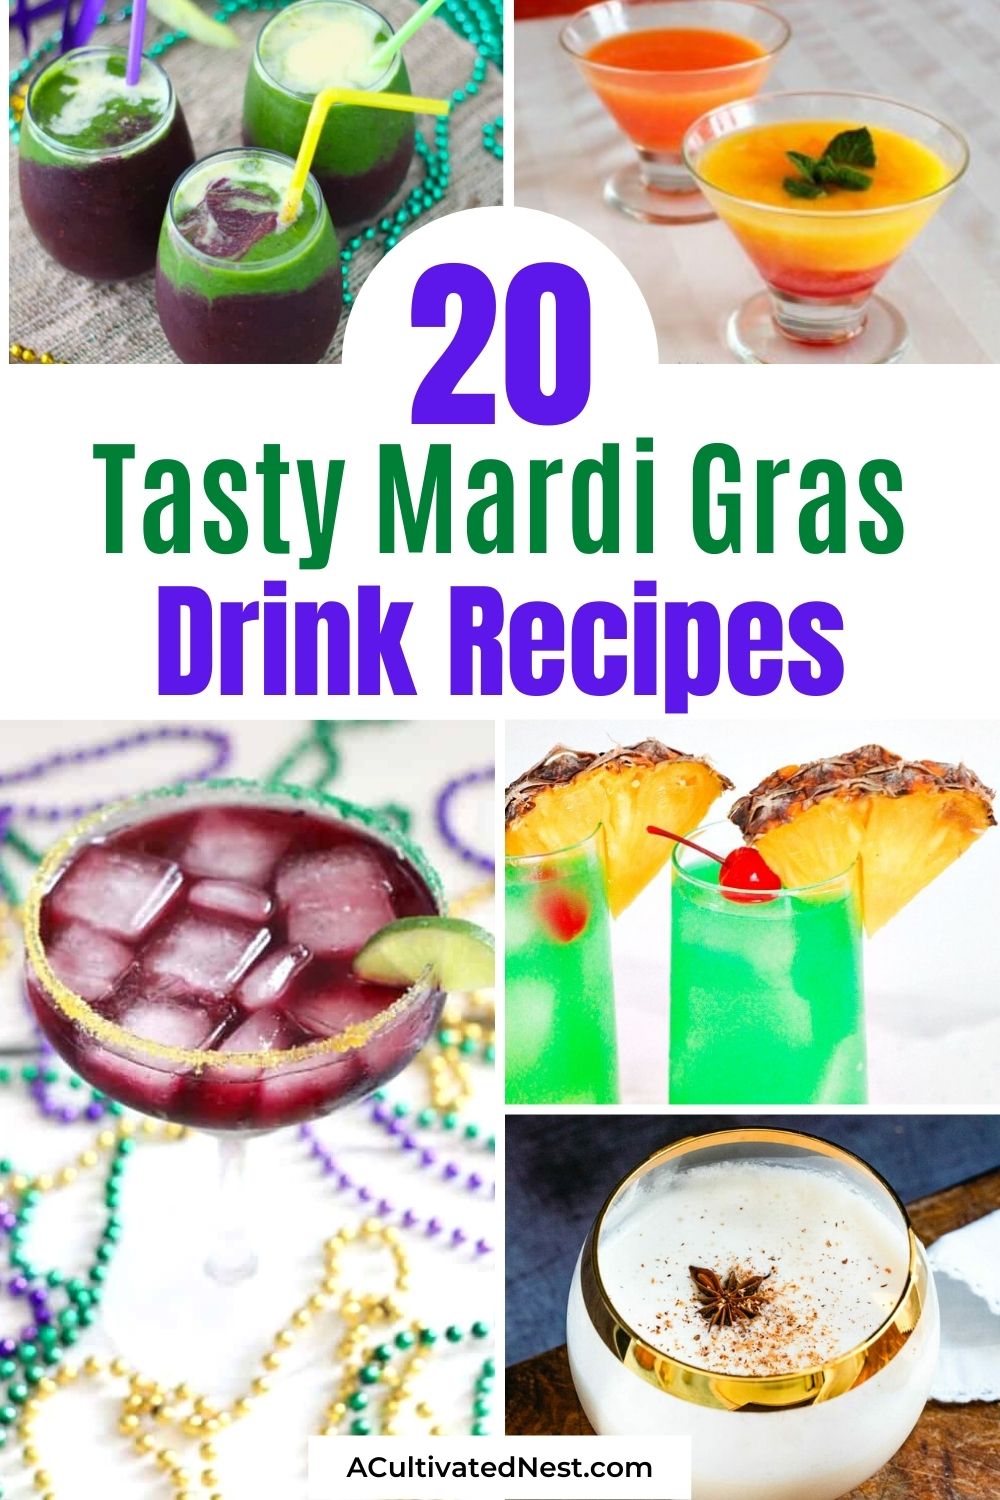 20 Delicious Mardi Gras Drink Recipes- This year, make your Mardi Gras party extra special with some delicious alcoholic and nonalcoholic homemade Mardi Gras drink recipes! | #drinkRecipes #mardiGras #nonalcoholicDrinks #homemadeDrinks #ACultivatedNest